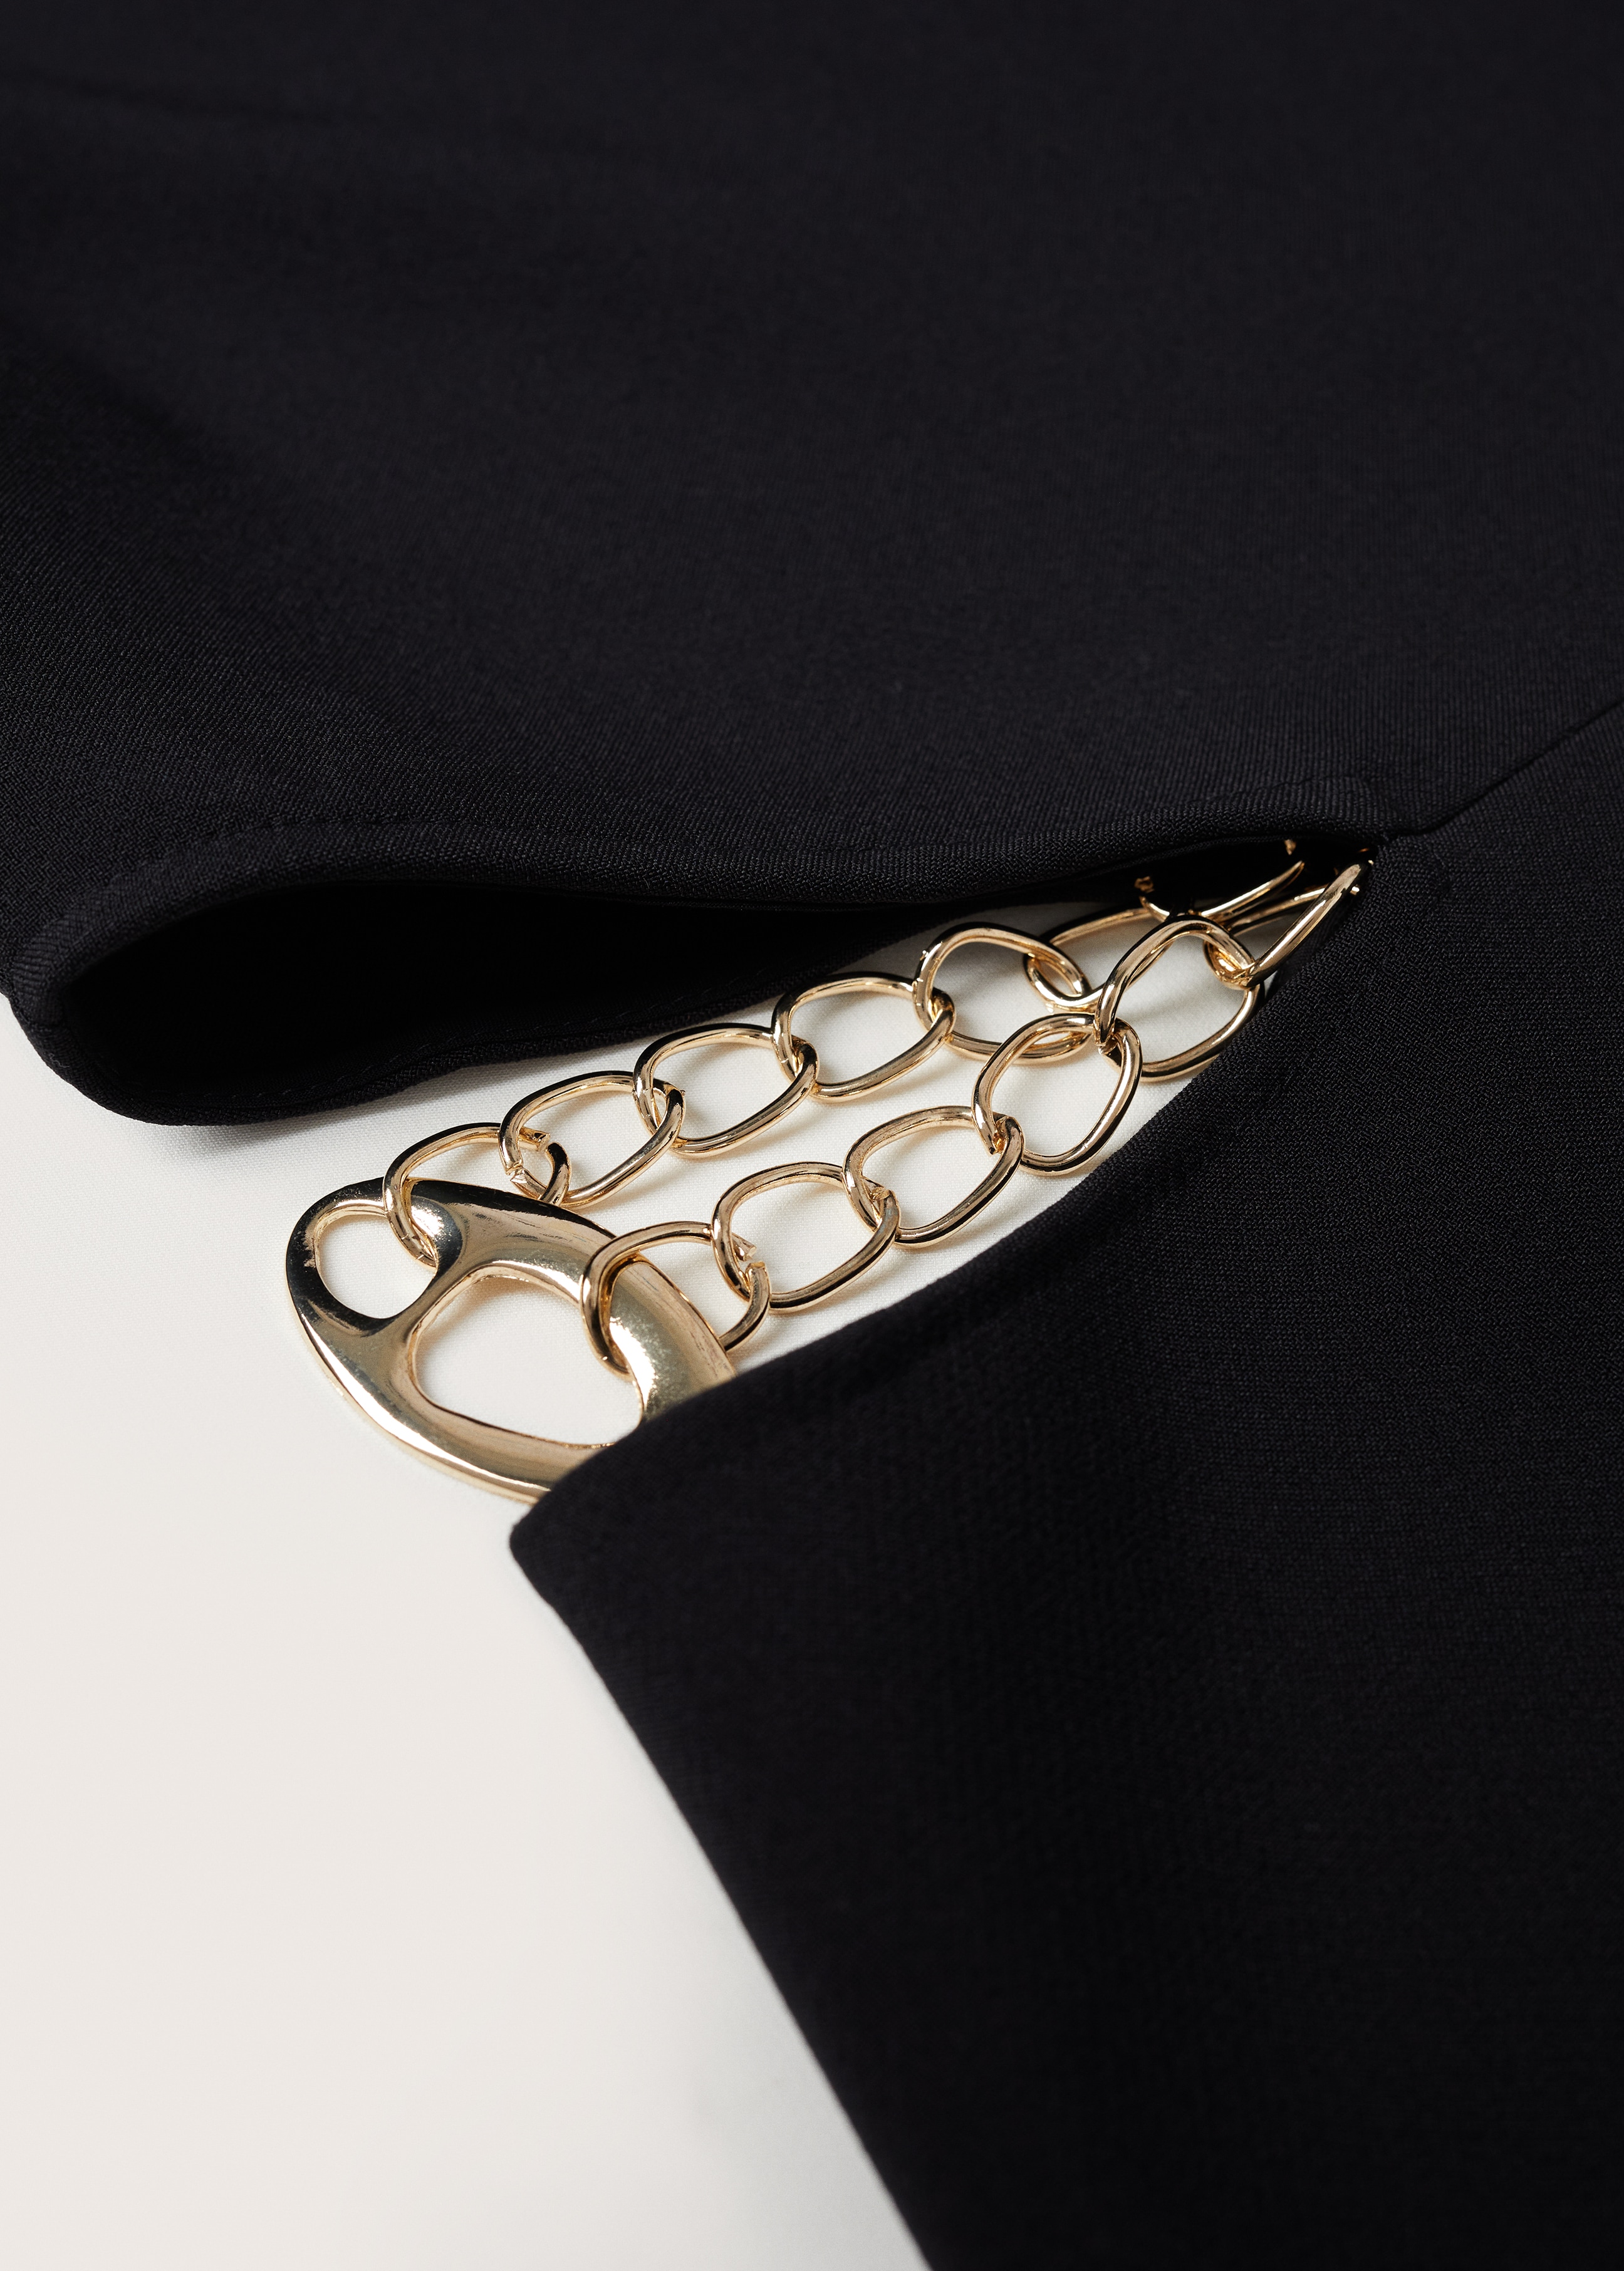 Cut-out bodycon dress - Details of the article 8